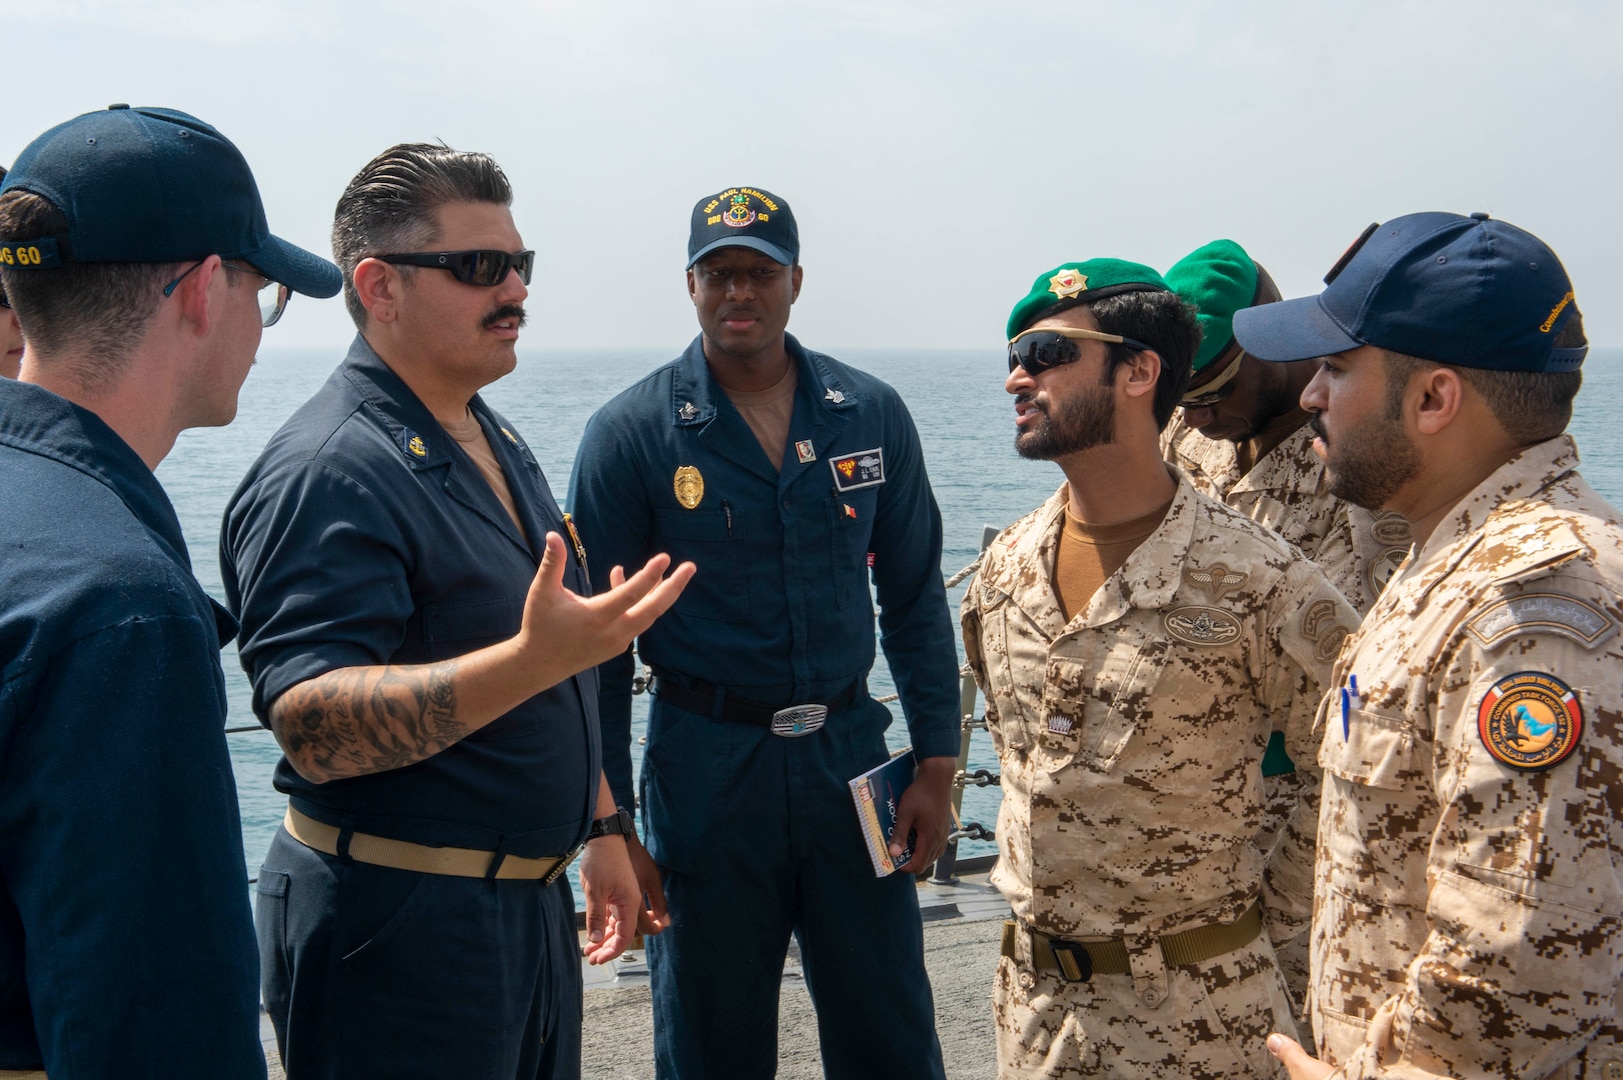 230226-N-NH267-1127 ARABIAN GULF (Feb. 26, 2023) Chief Gunner’s Mate Joseph Hourieh speaks with members of the Bahrain Defence Force aboard guided-missile destroyer USS Paul Hamilton (DDG 60) in the Arabian Gulf, Feb. 26, 2023. Paul Hamilton is deployed to the U.S. 5th Fleet area of operations to help ensure maritime security and stability in the Middle East region.